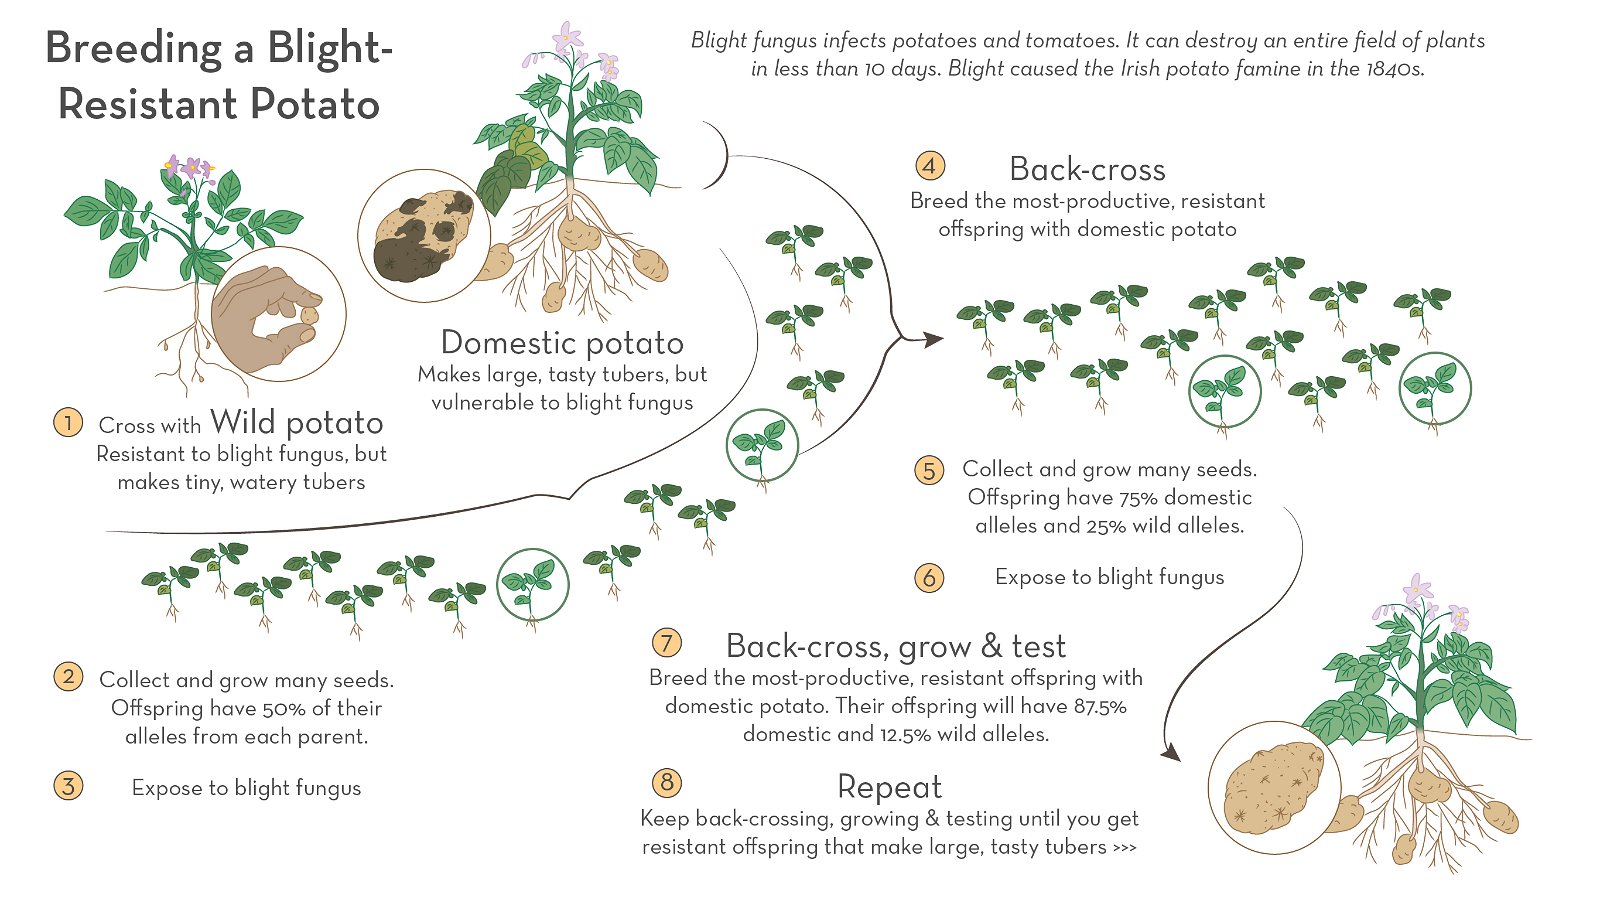 info graphic showing the breeding of a blight resistant potatoe